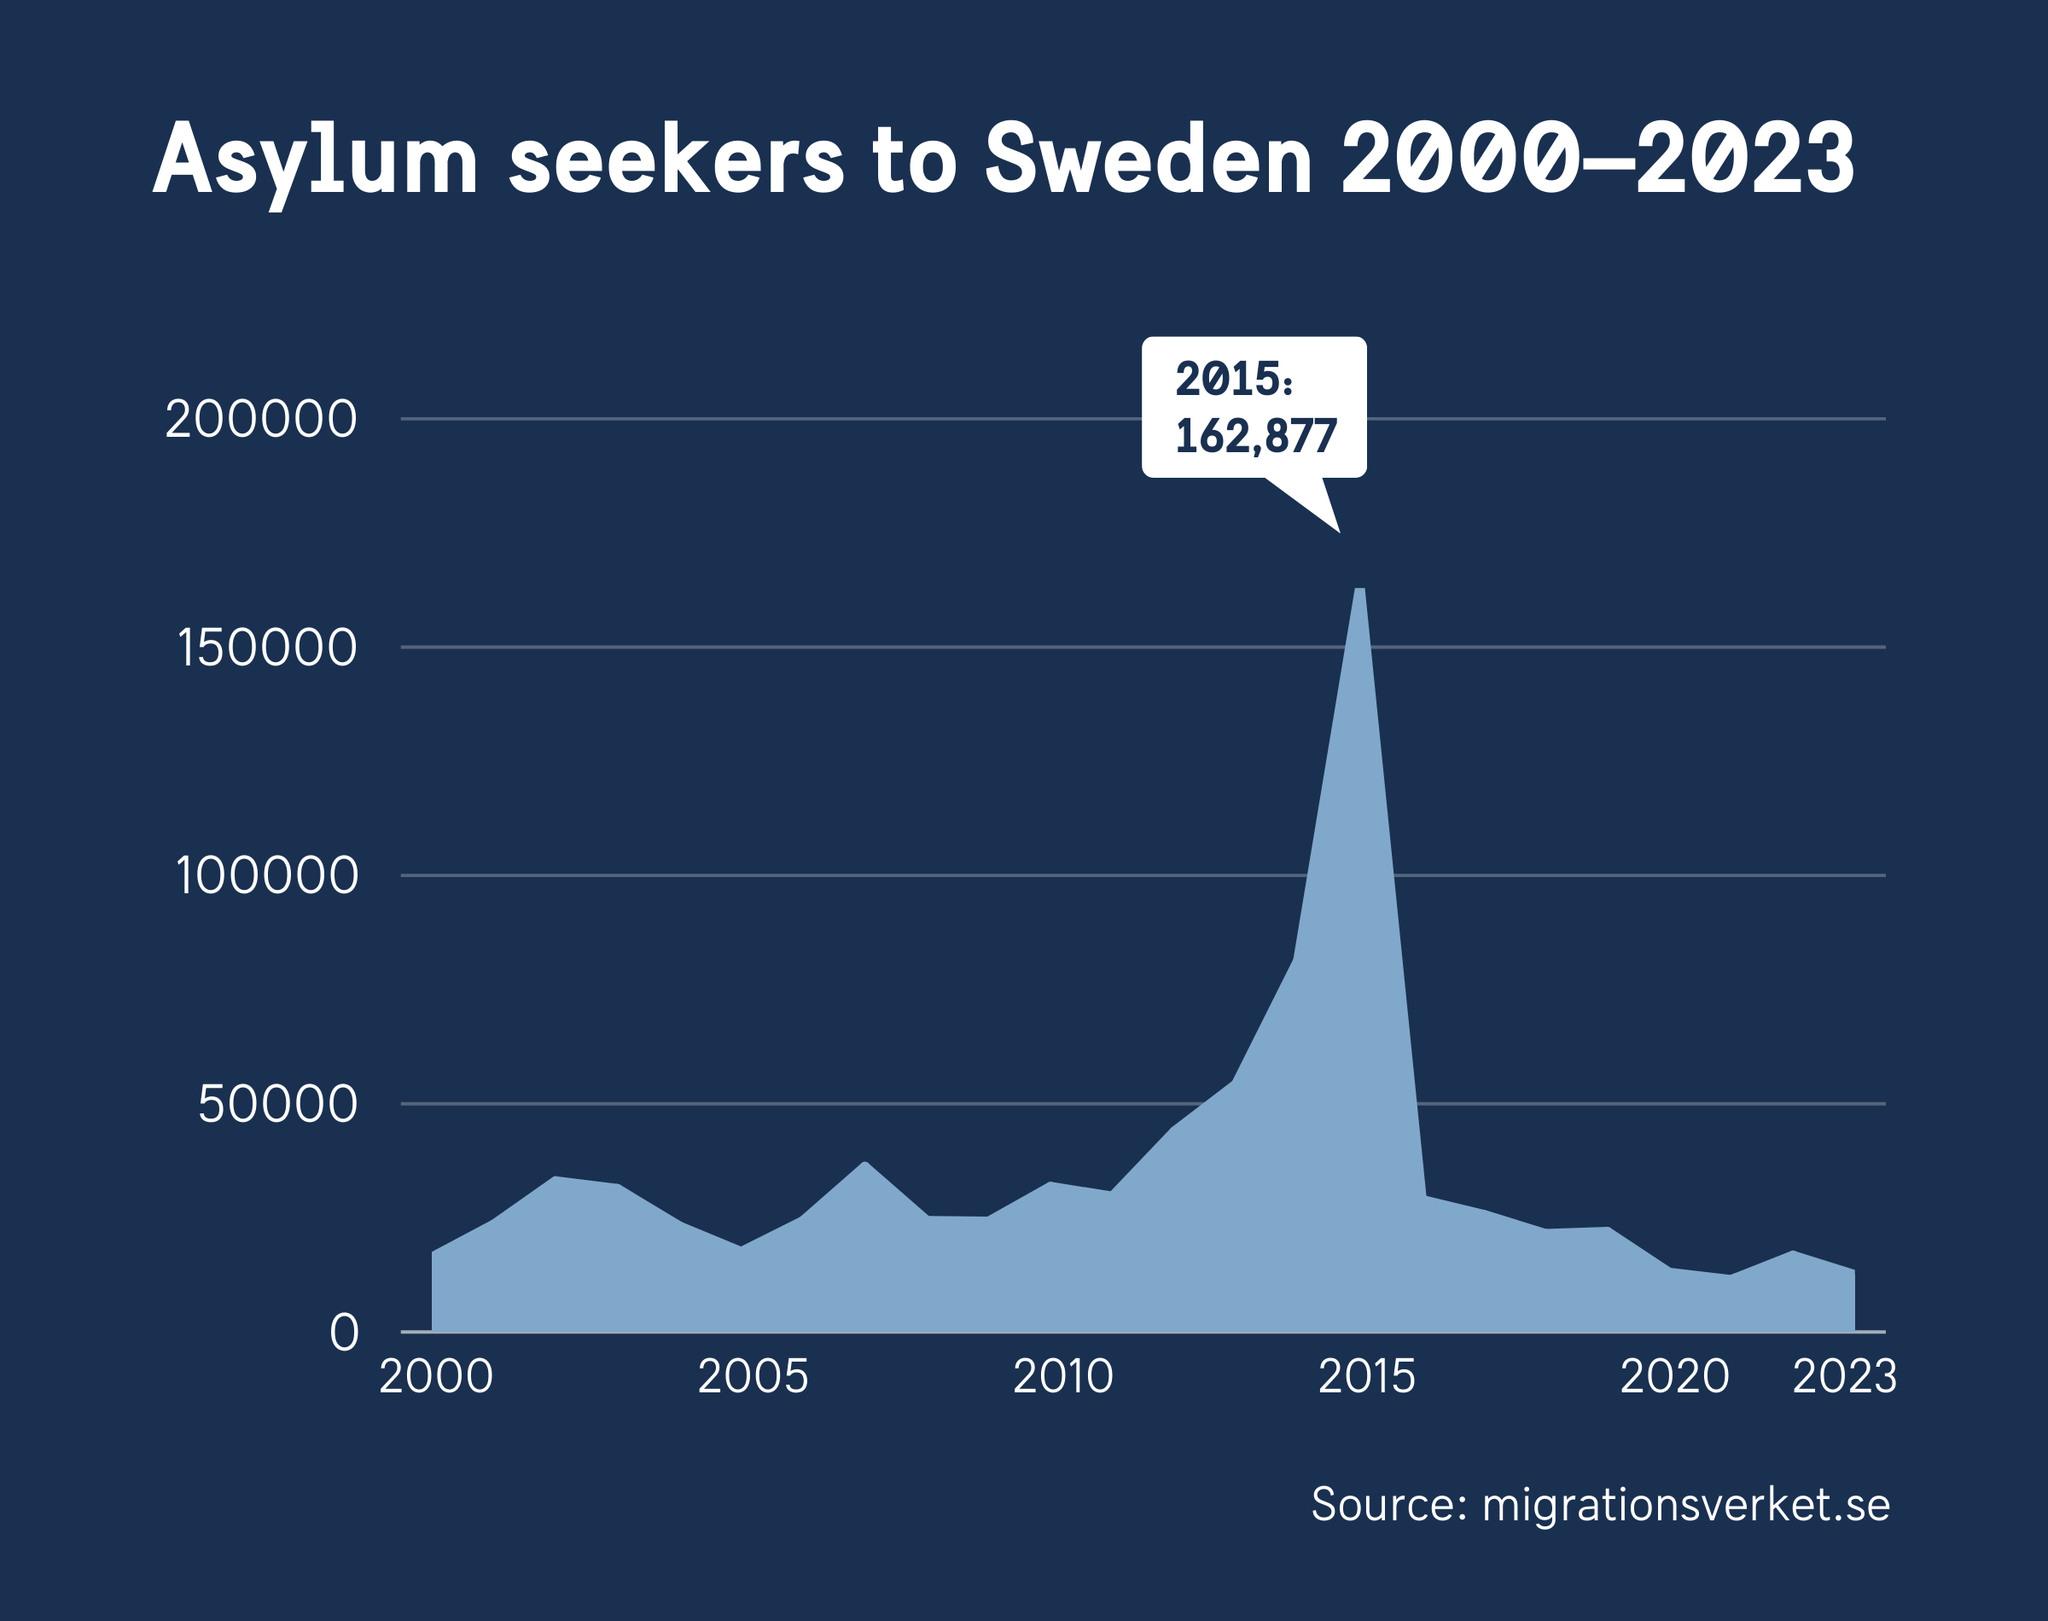 Chart showing the number of asylum seekers to Sweden 2000–2023.